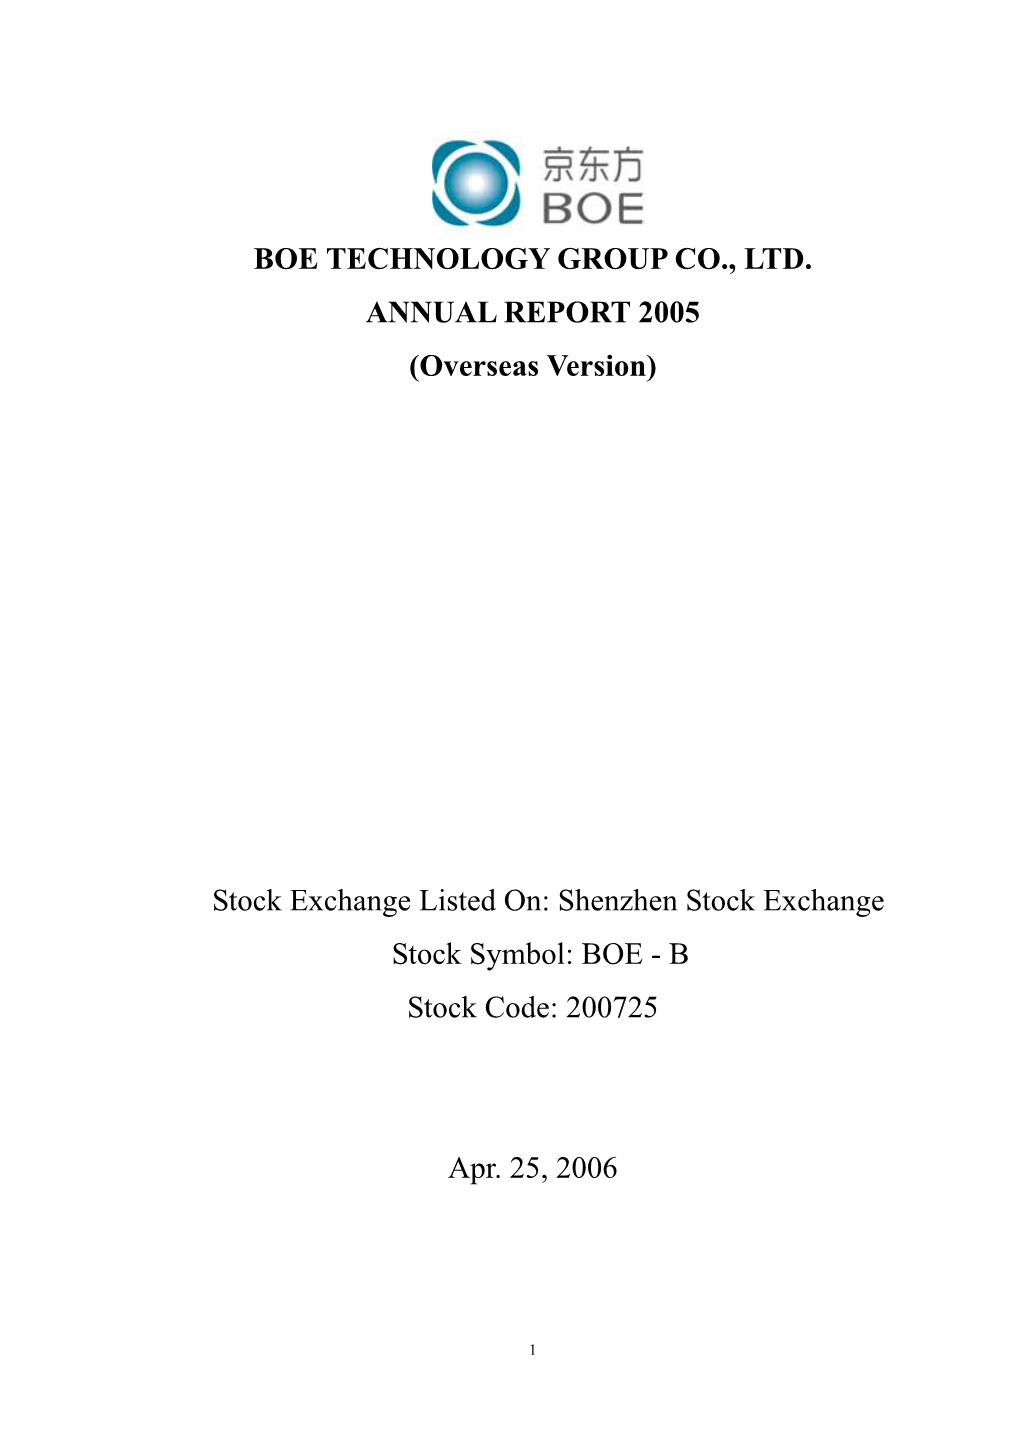 BOE TECHNOLOGY GROUP CO., LTD. ANNUAL REPORT 2005 (Overseas Version) Stock Exchange Listed On: Shenzhen Stock Exchange Stock